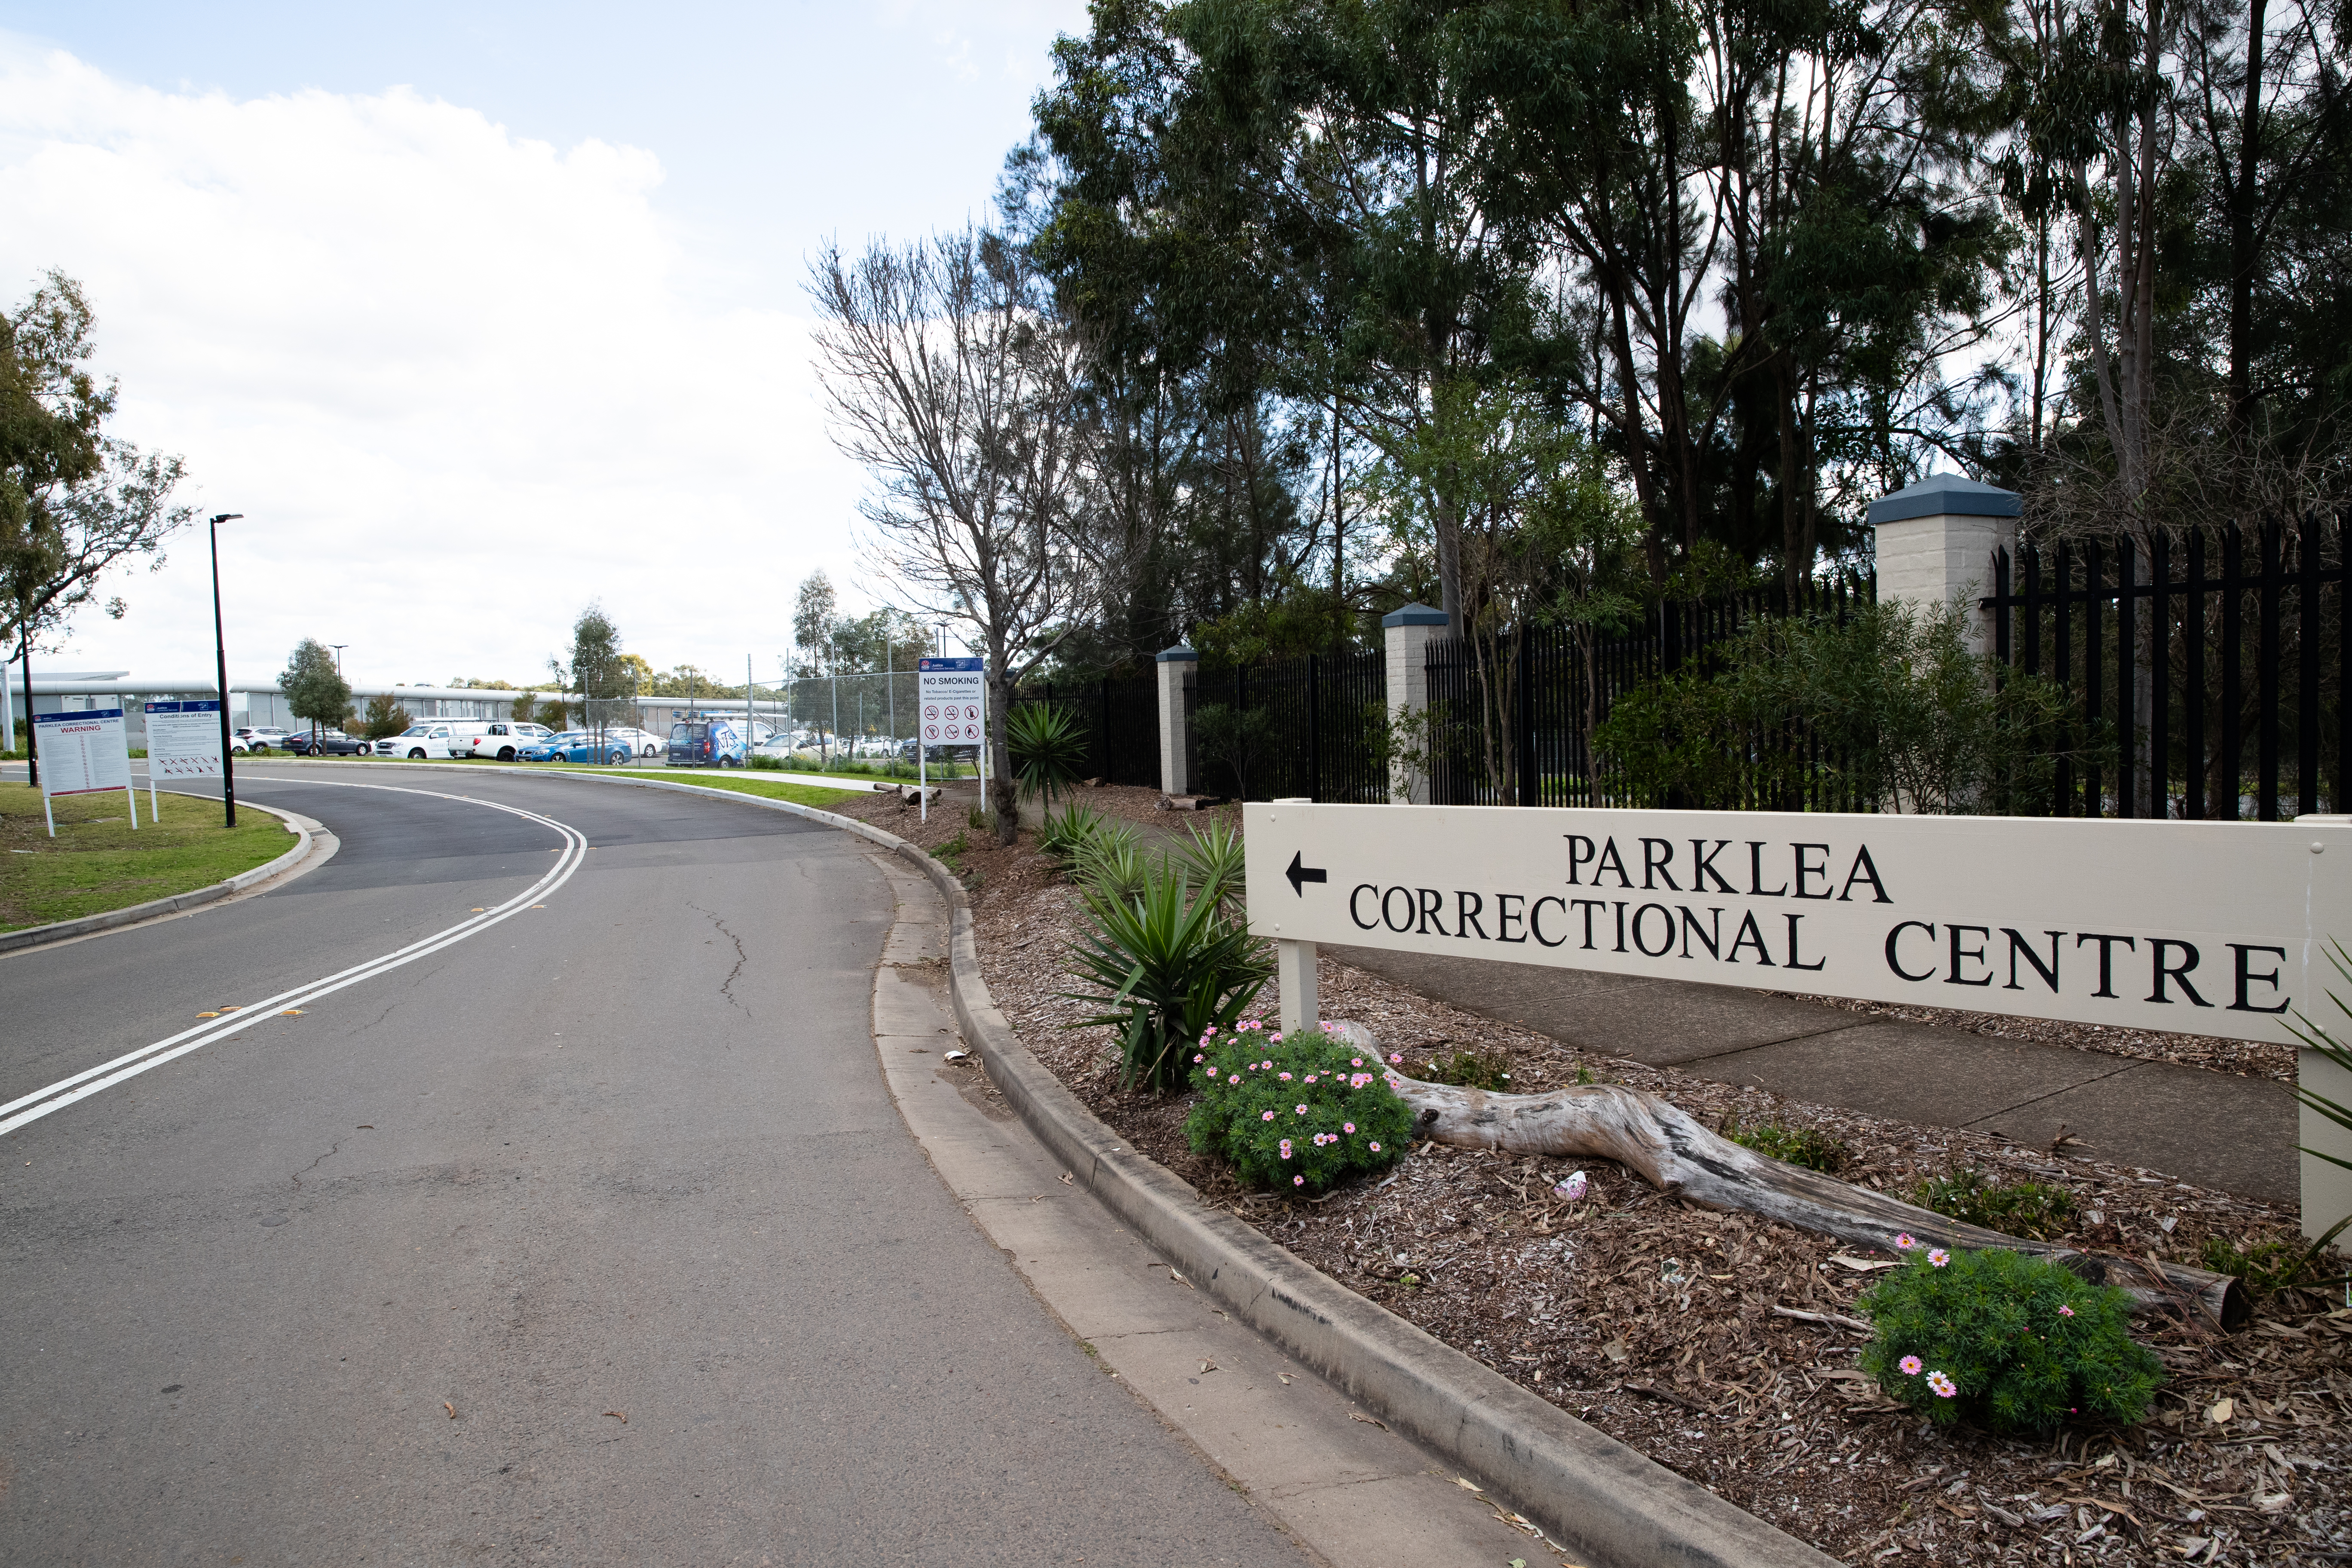 Parklea Correctional Centre in Sydney has a number of COVID-19 cases linked to it.